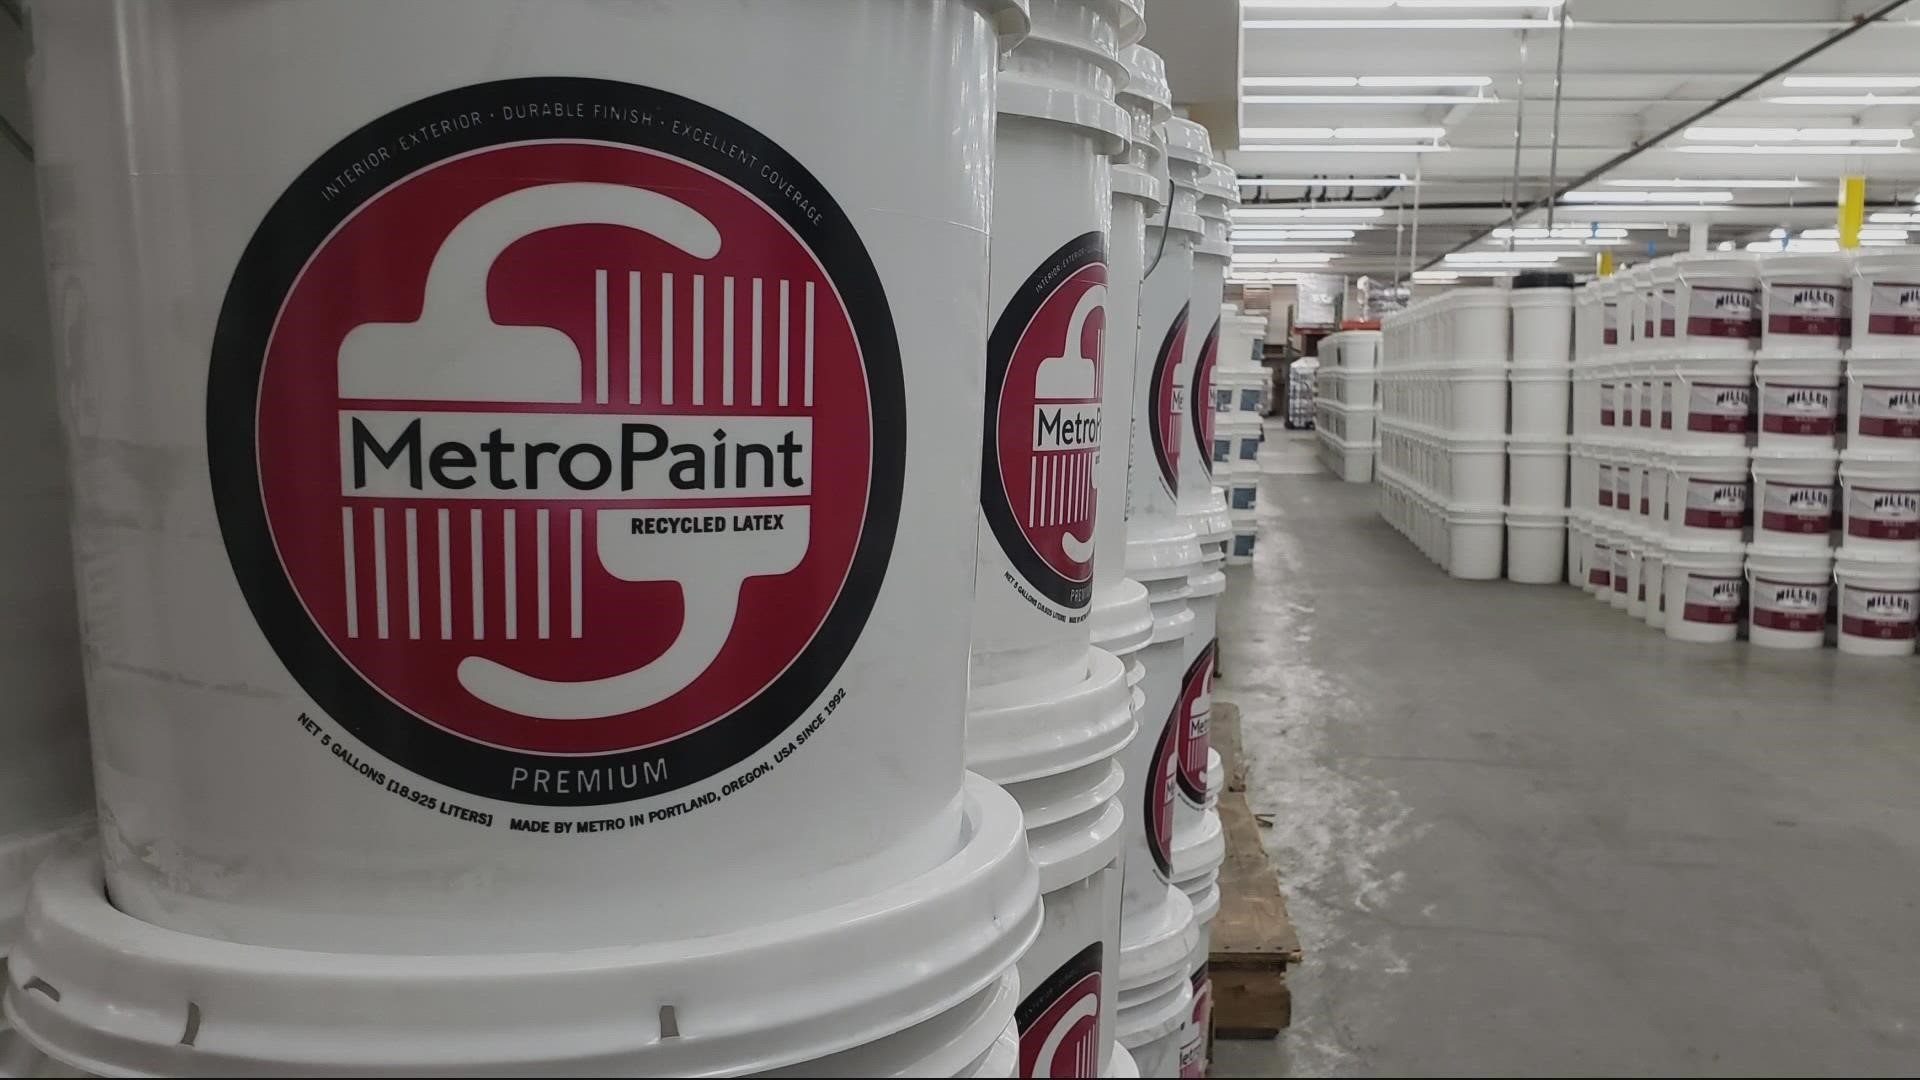 MetroPaint is manufactured from recycled latex paint. KGW Sunrise's Drew Carney got a look at the recycled paint that's colorful, affordable and earth-friendly.